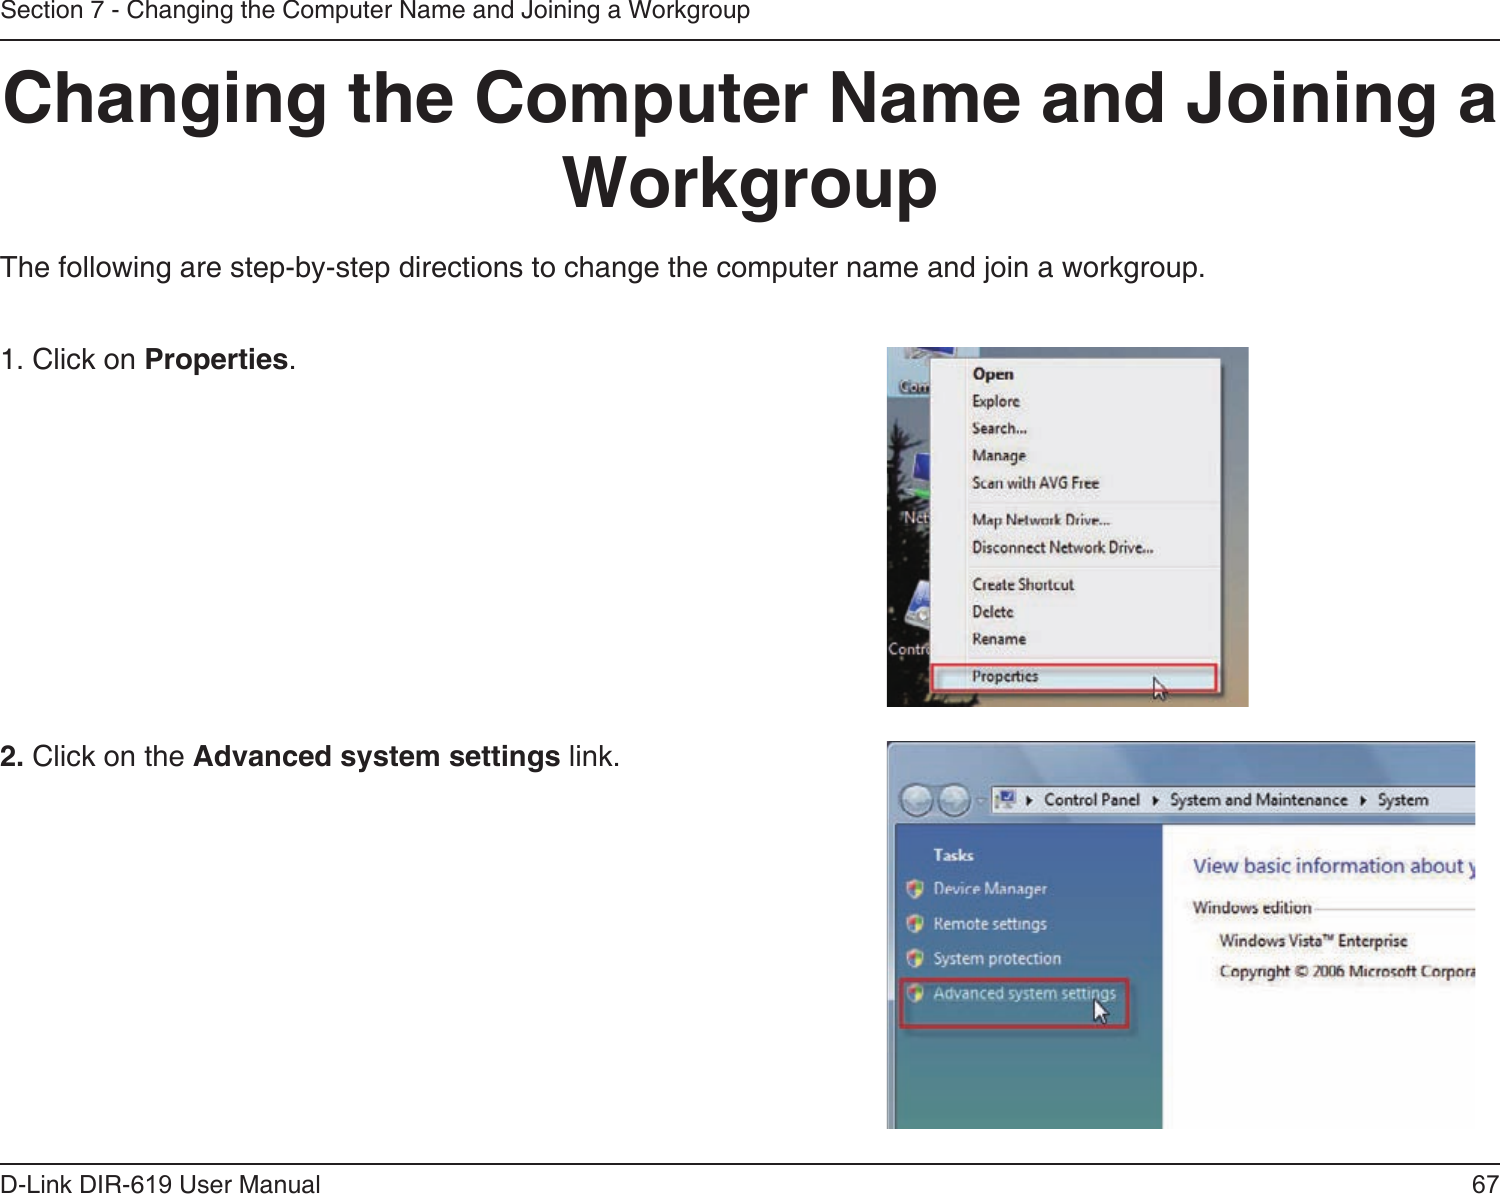 67D-Link DIR-619 User ManualSection 7 - Changing the Computer Name and Joining a WorkgroupChanging the Computer Name and Joining a WorkgroupThe following are step-by-step directions to change the computer name and join a workgroup.      2. Click on the Advanced system settings link. 1. Click on Properties.